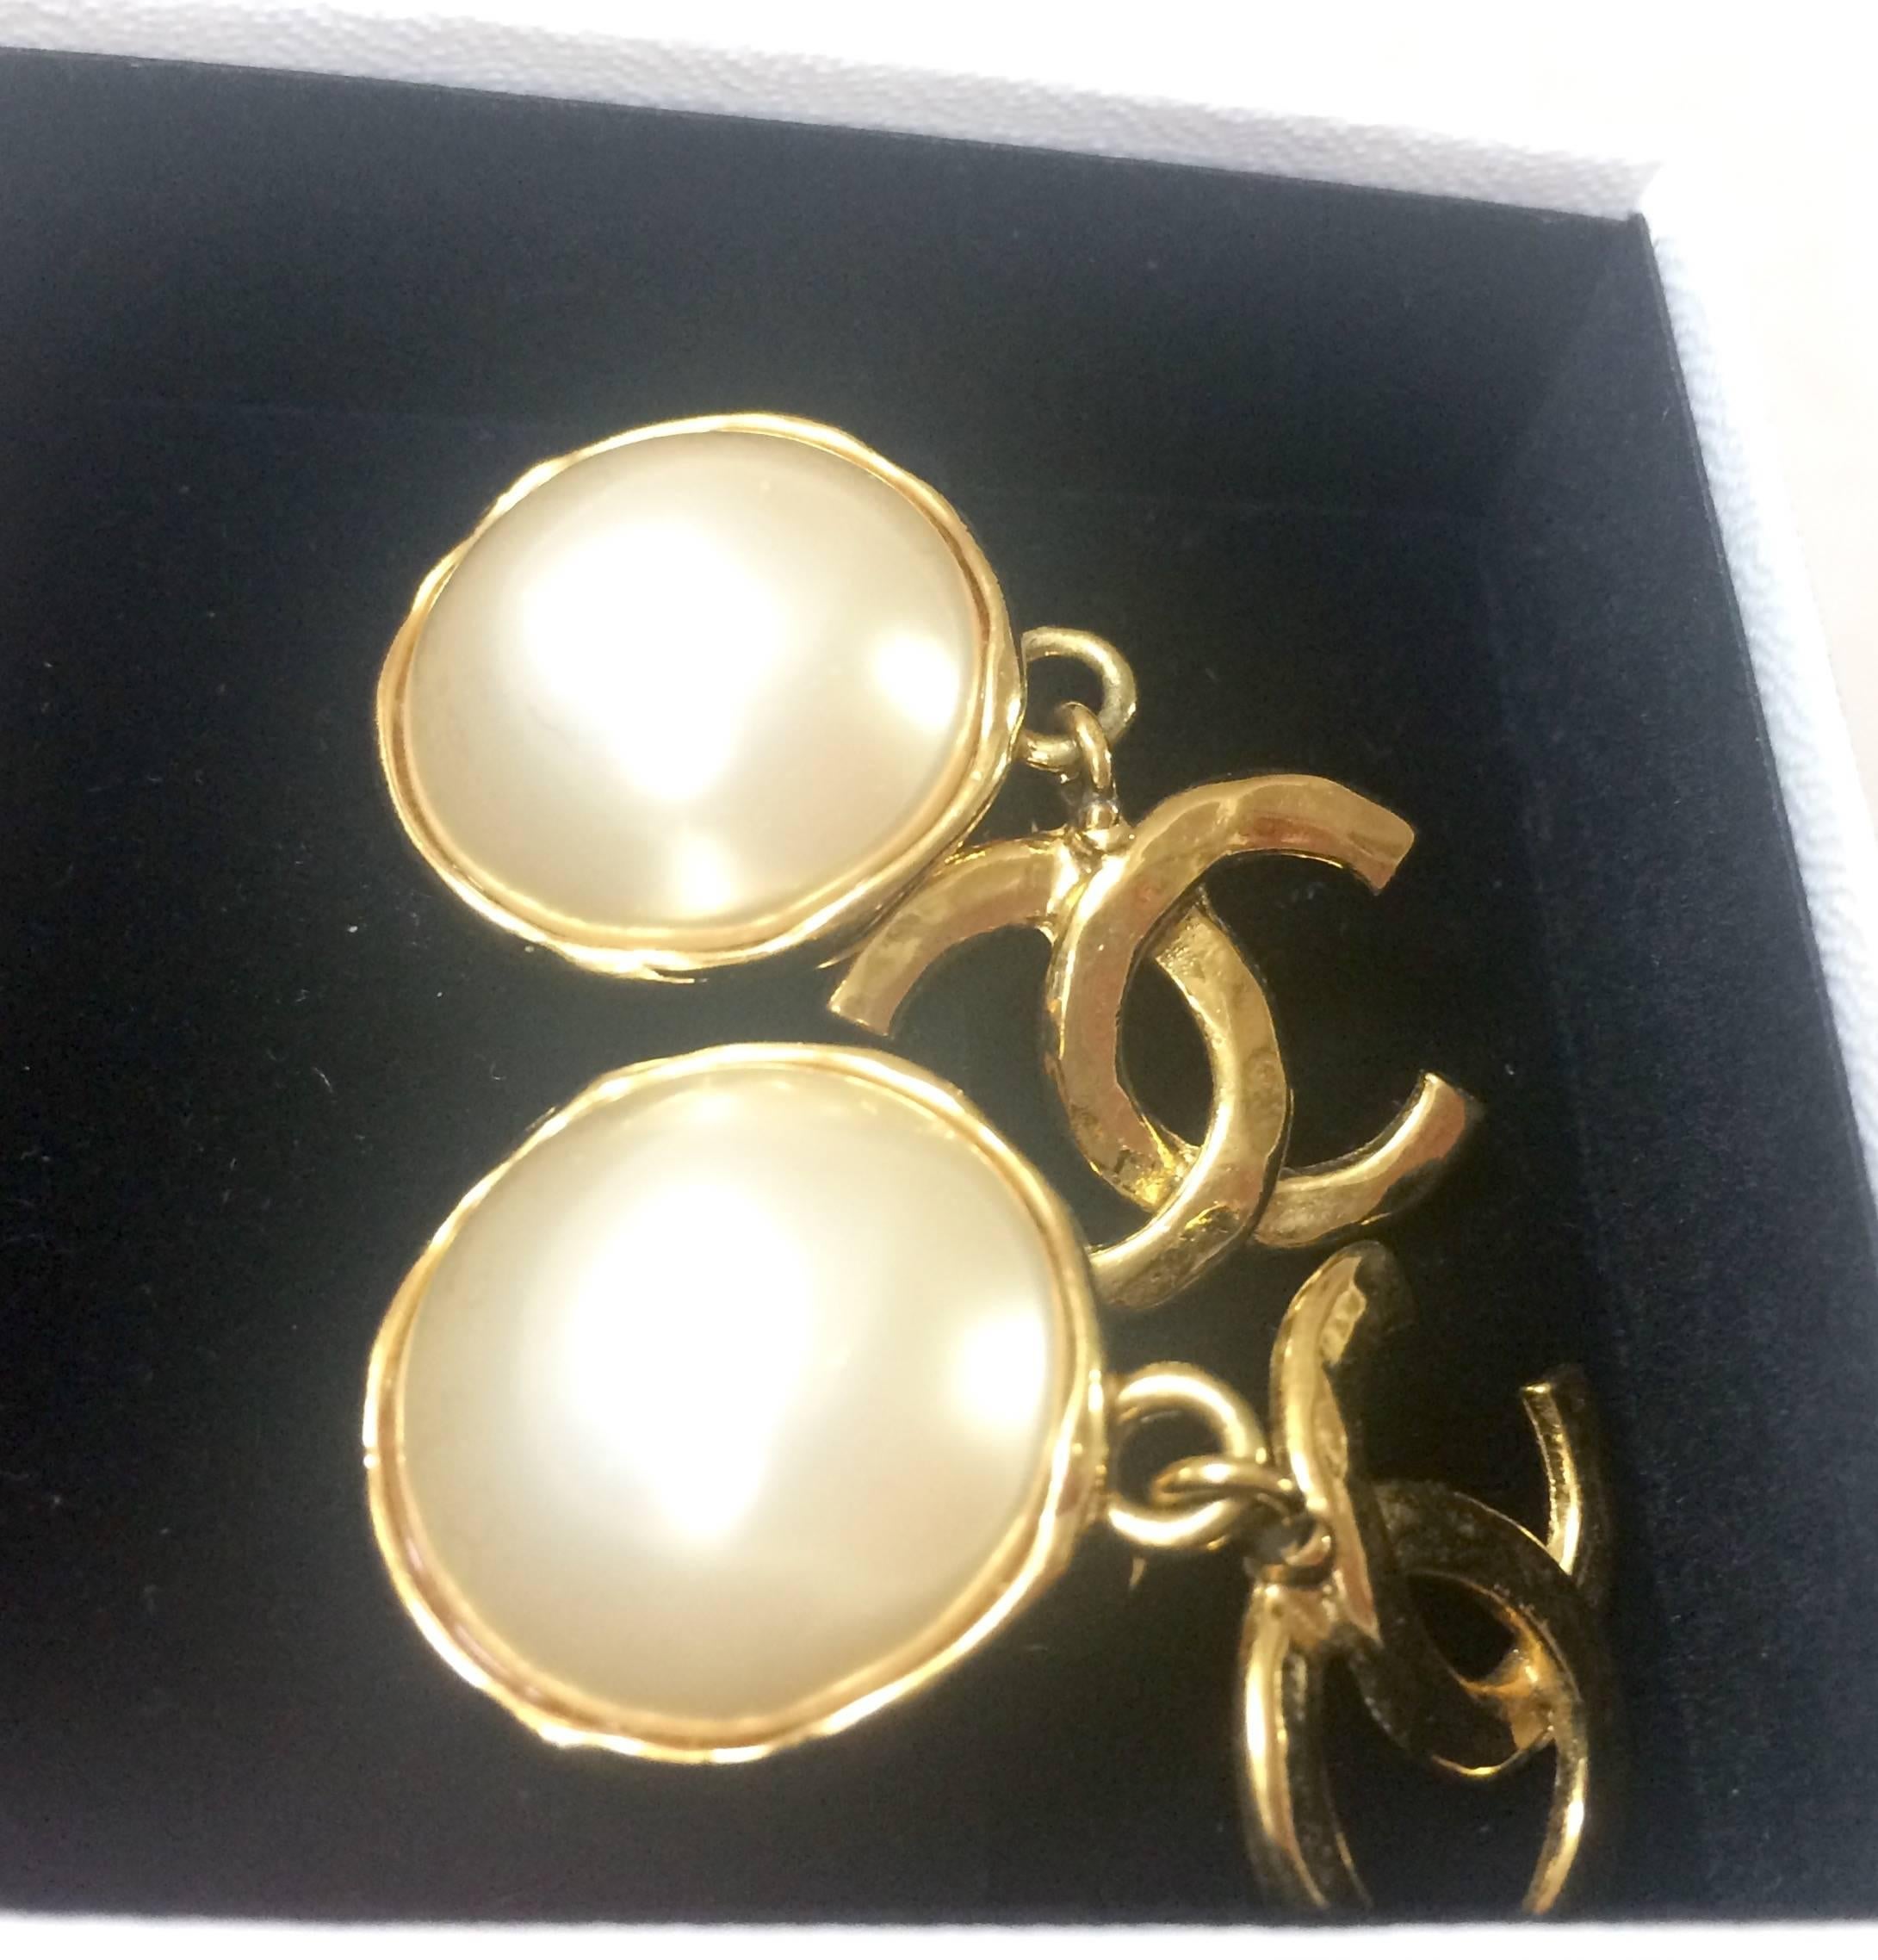 MINT. Vintage CHANEL white faux pearl and golden dangling earrings with CC mark. 2